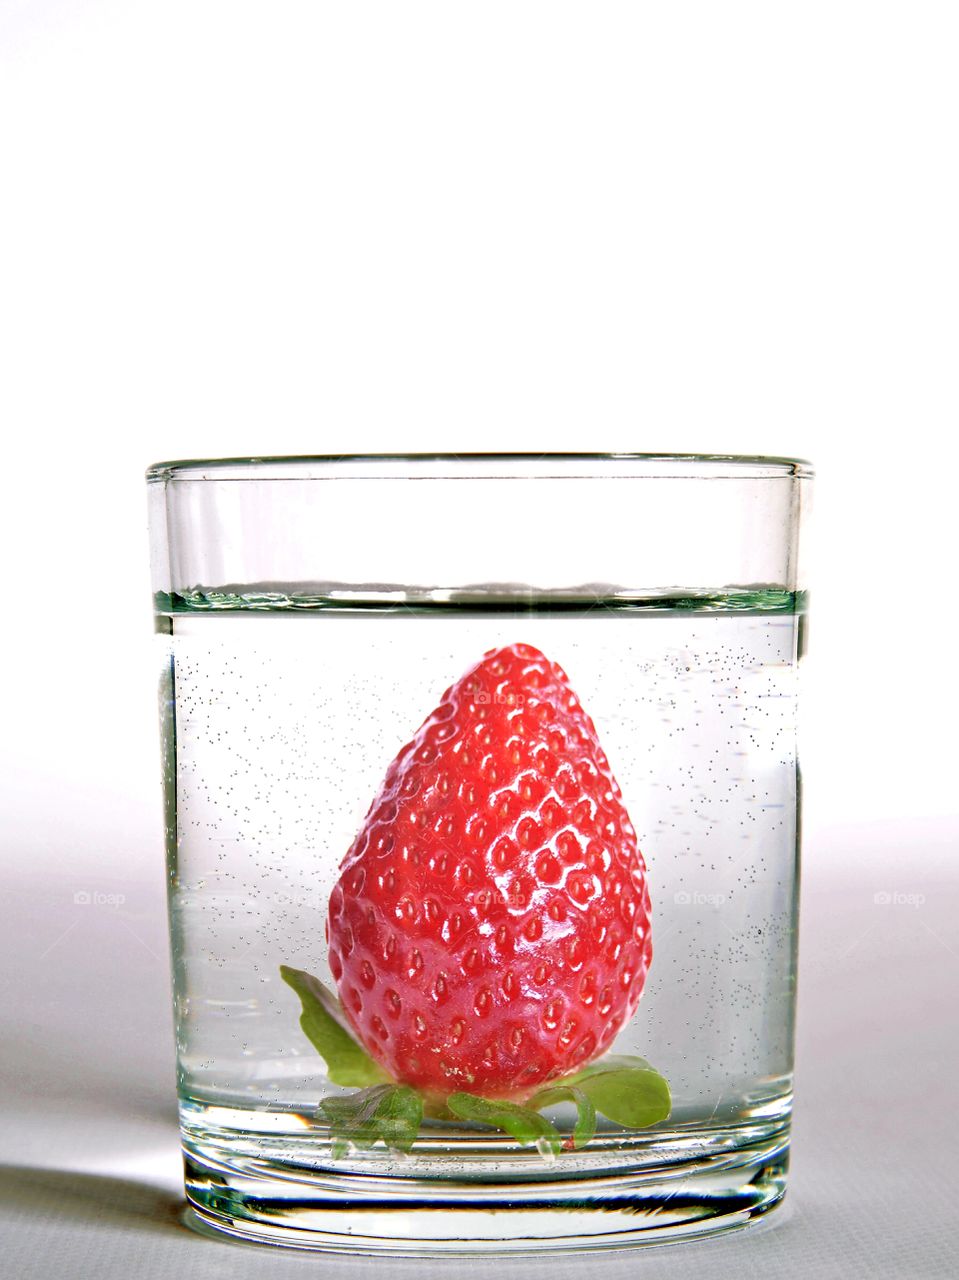 a strawberry in the glass